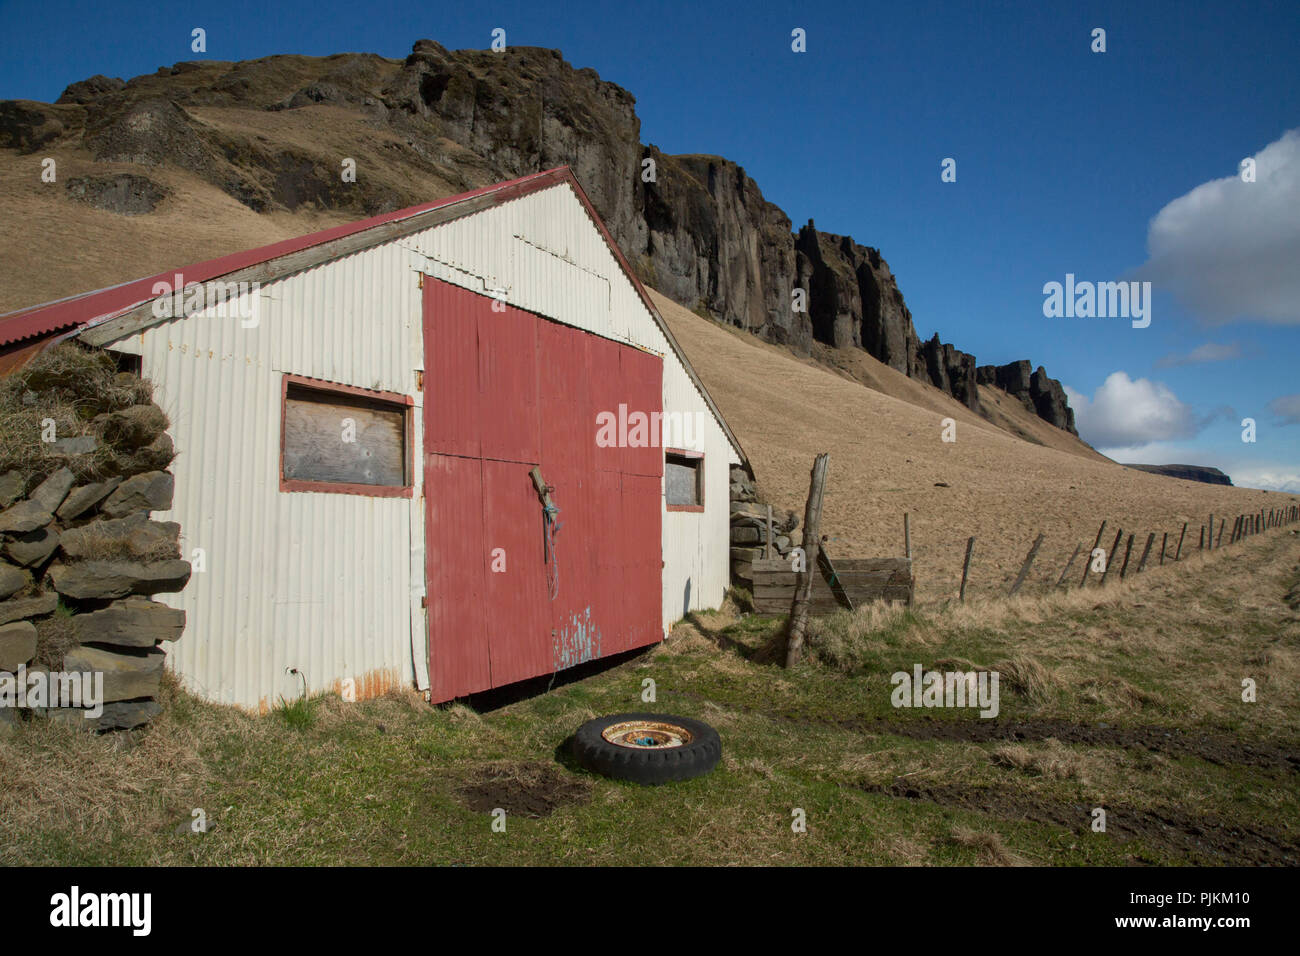 Iceland, south Iceland, old barn with car tire, fence, mountains, blue sky Stock Photo